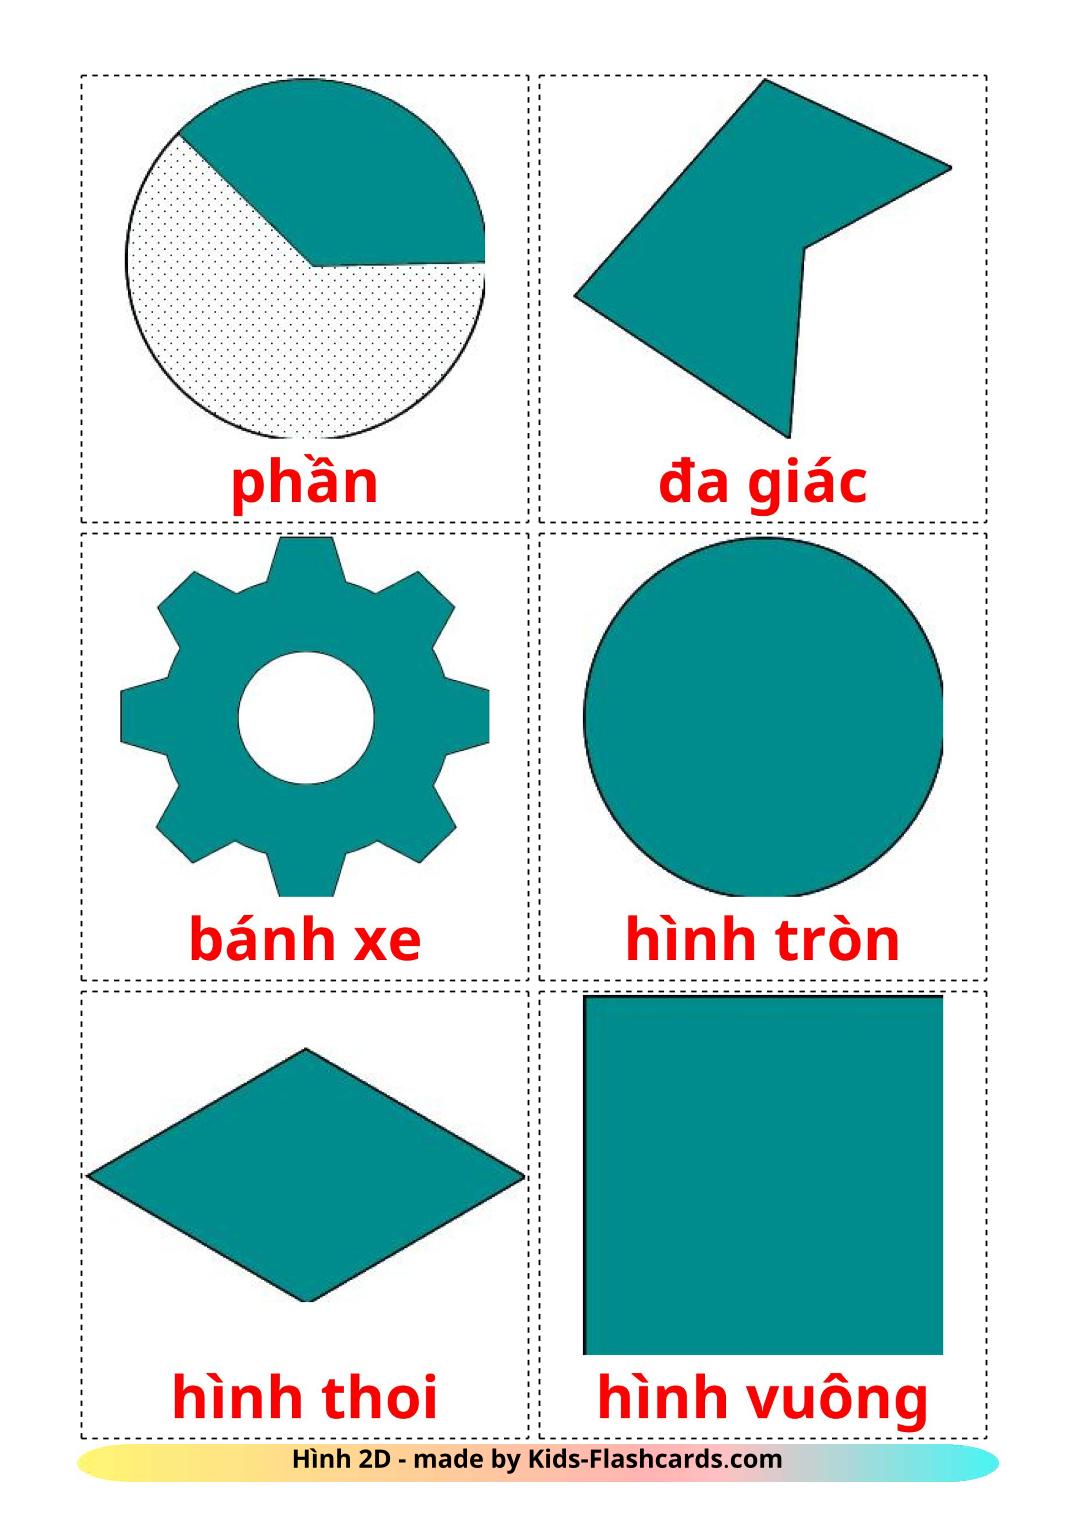 2D Shapes - 35 Free Printable vietnamese Flashcards 